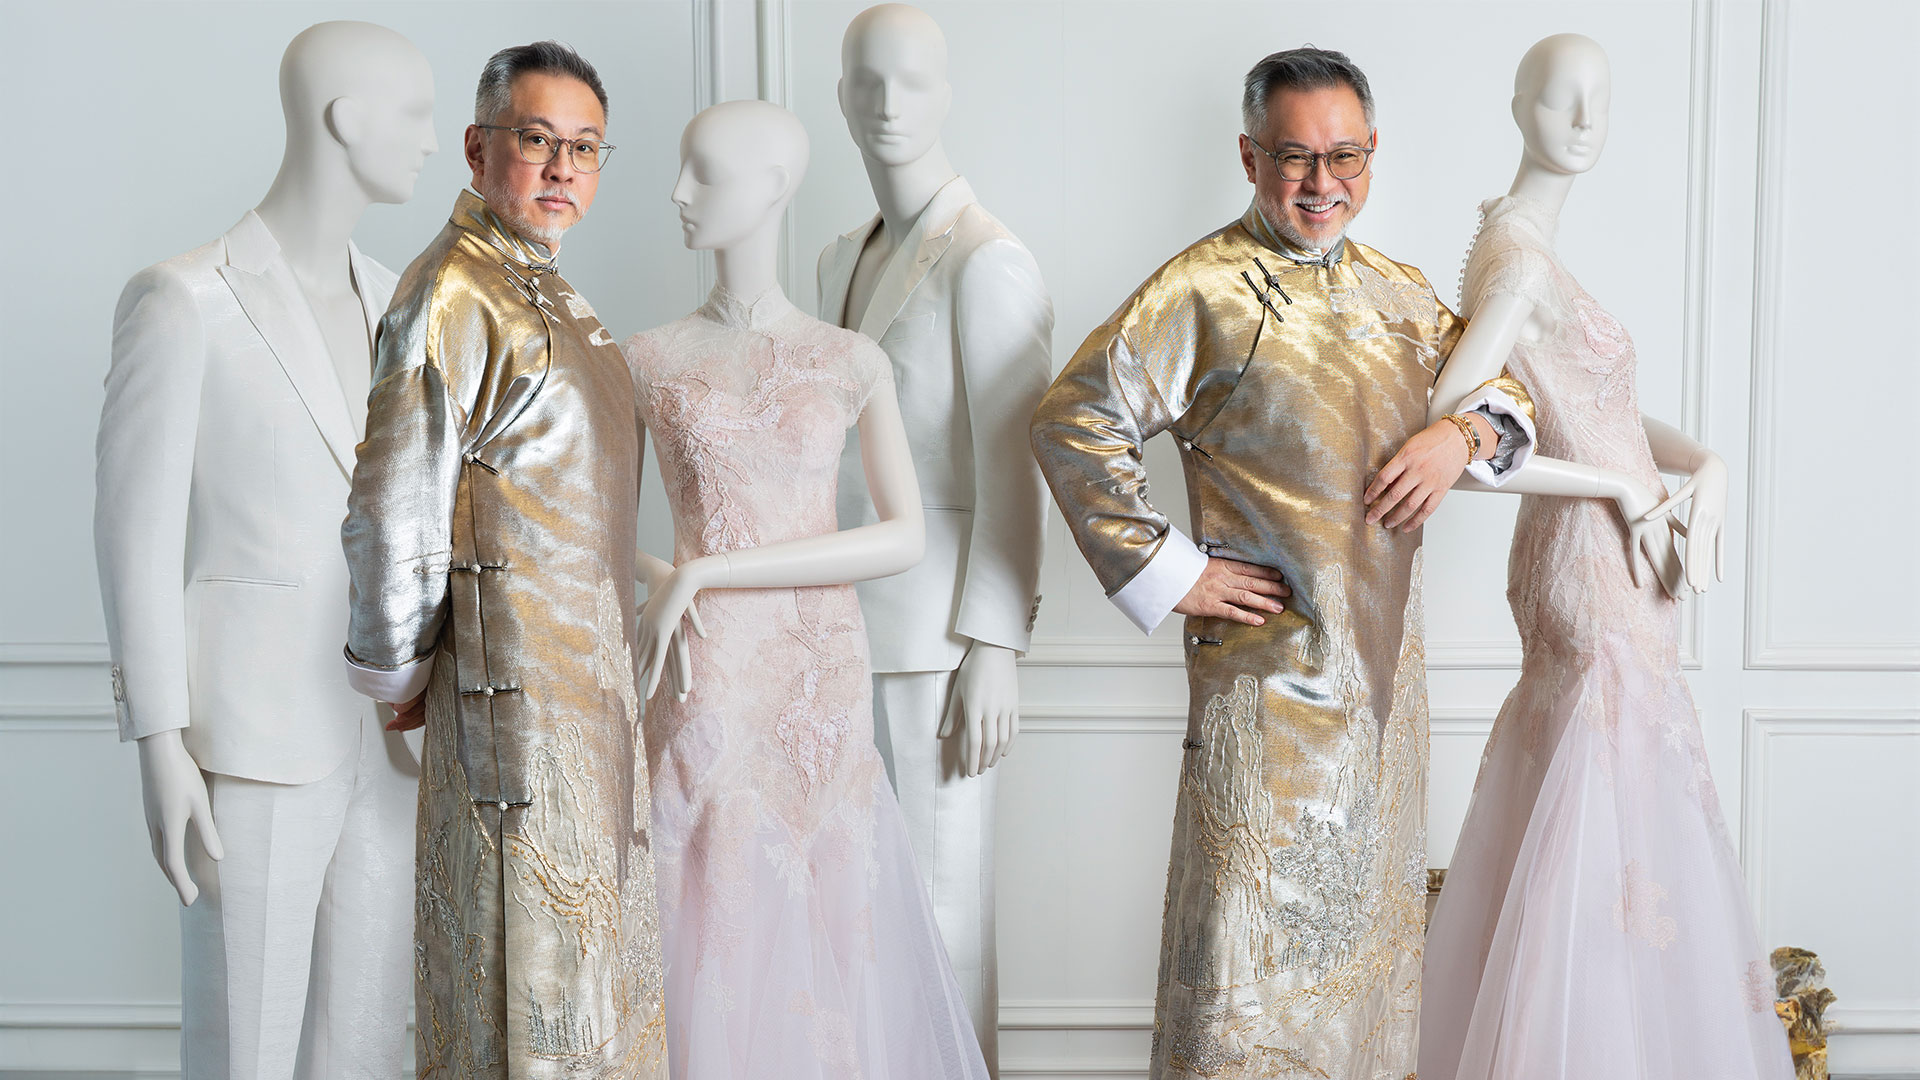 Design Providence: The extravagant designs of enduring couturier Barney Cheng create extraordinary pleasure